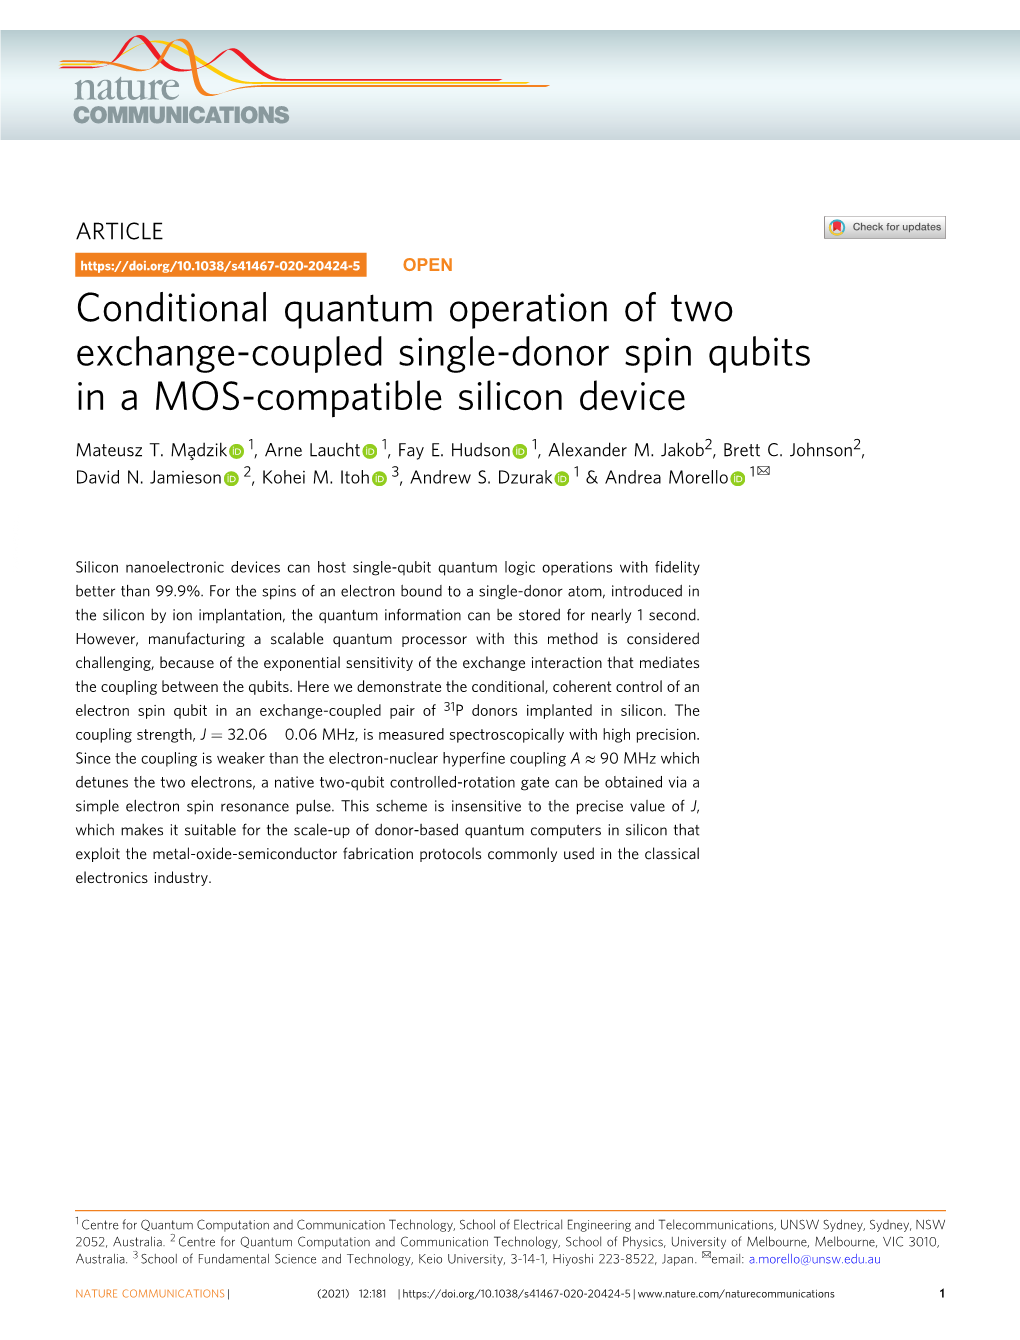 Conditional Quantum Operation of Two Exchange-Coupled Single-Donor Spin Qubits in a MOS-Compatible Silicon Device